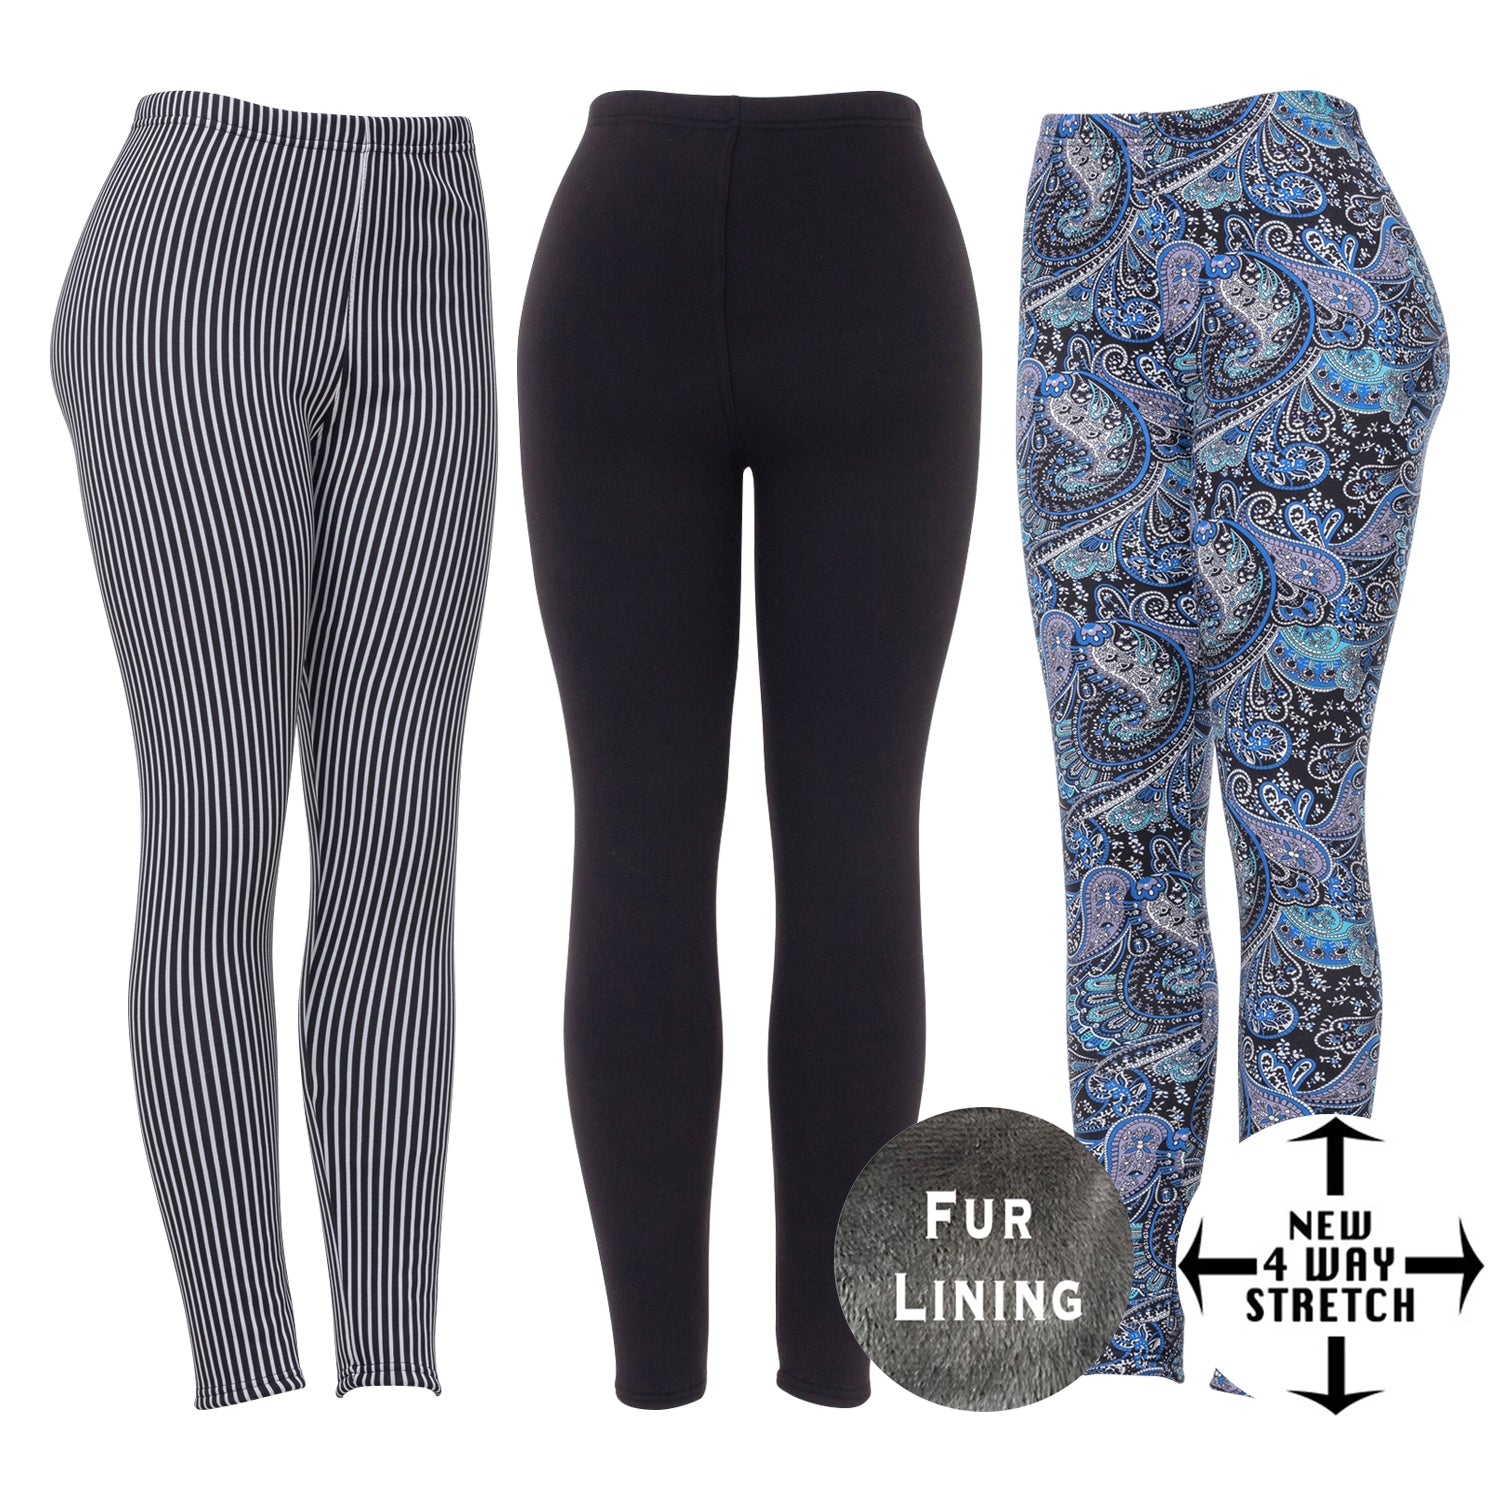 All Season Leggings Available in M-L – Just Cozy